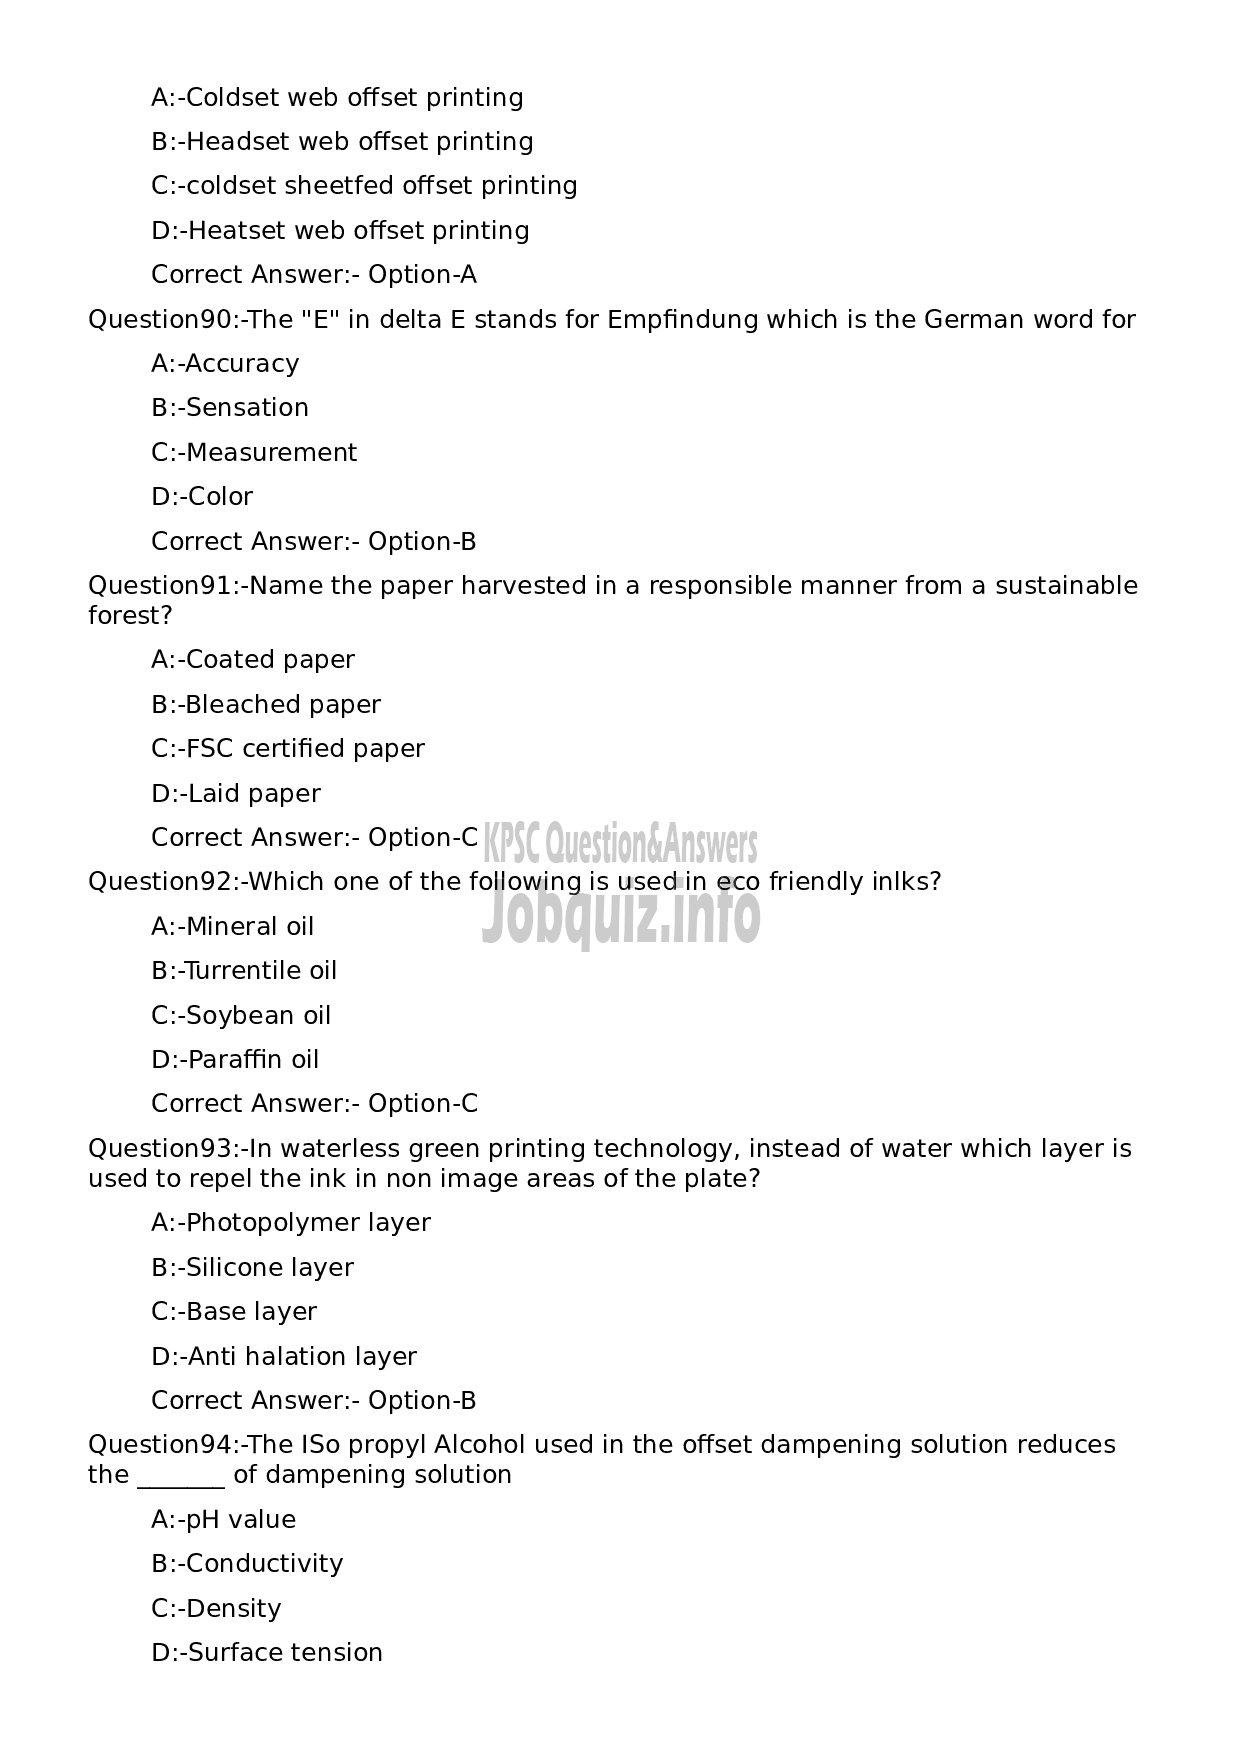 Kerala PSC Question Paper - Lecturer in Printing Technology-18